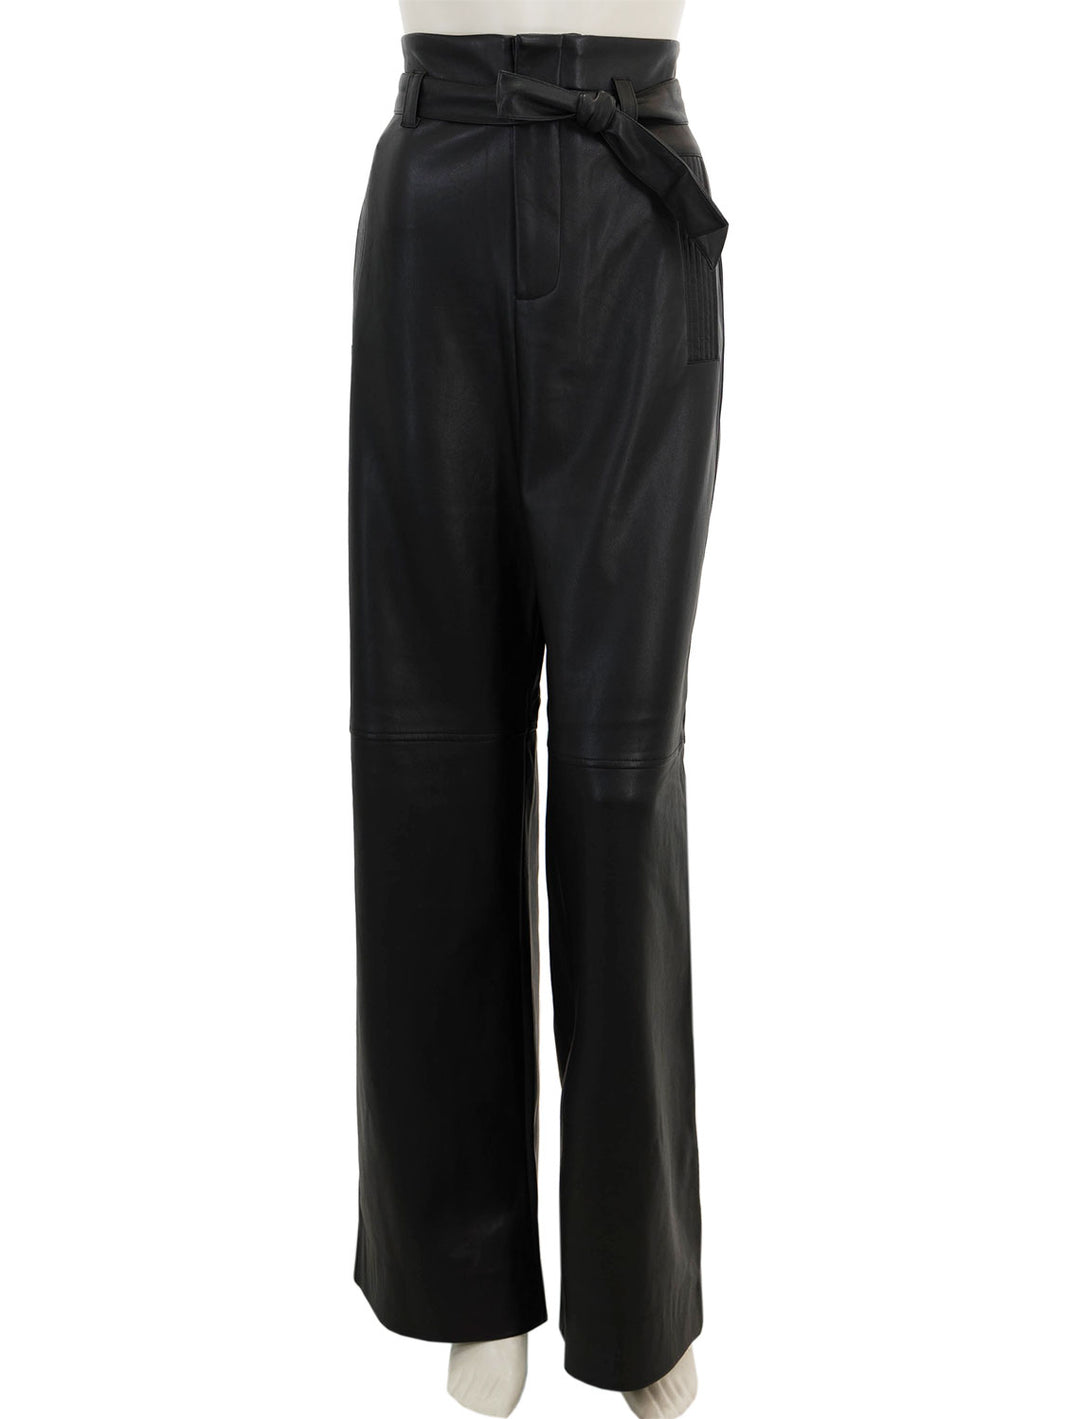 Front view of Essentiel Antwerp's encounter faux leather pants in black.